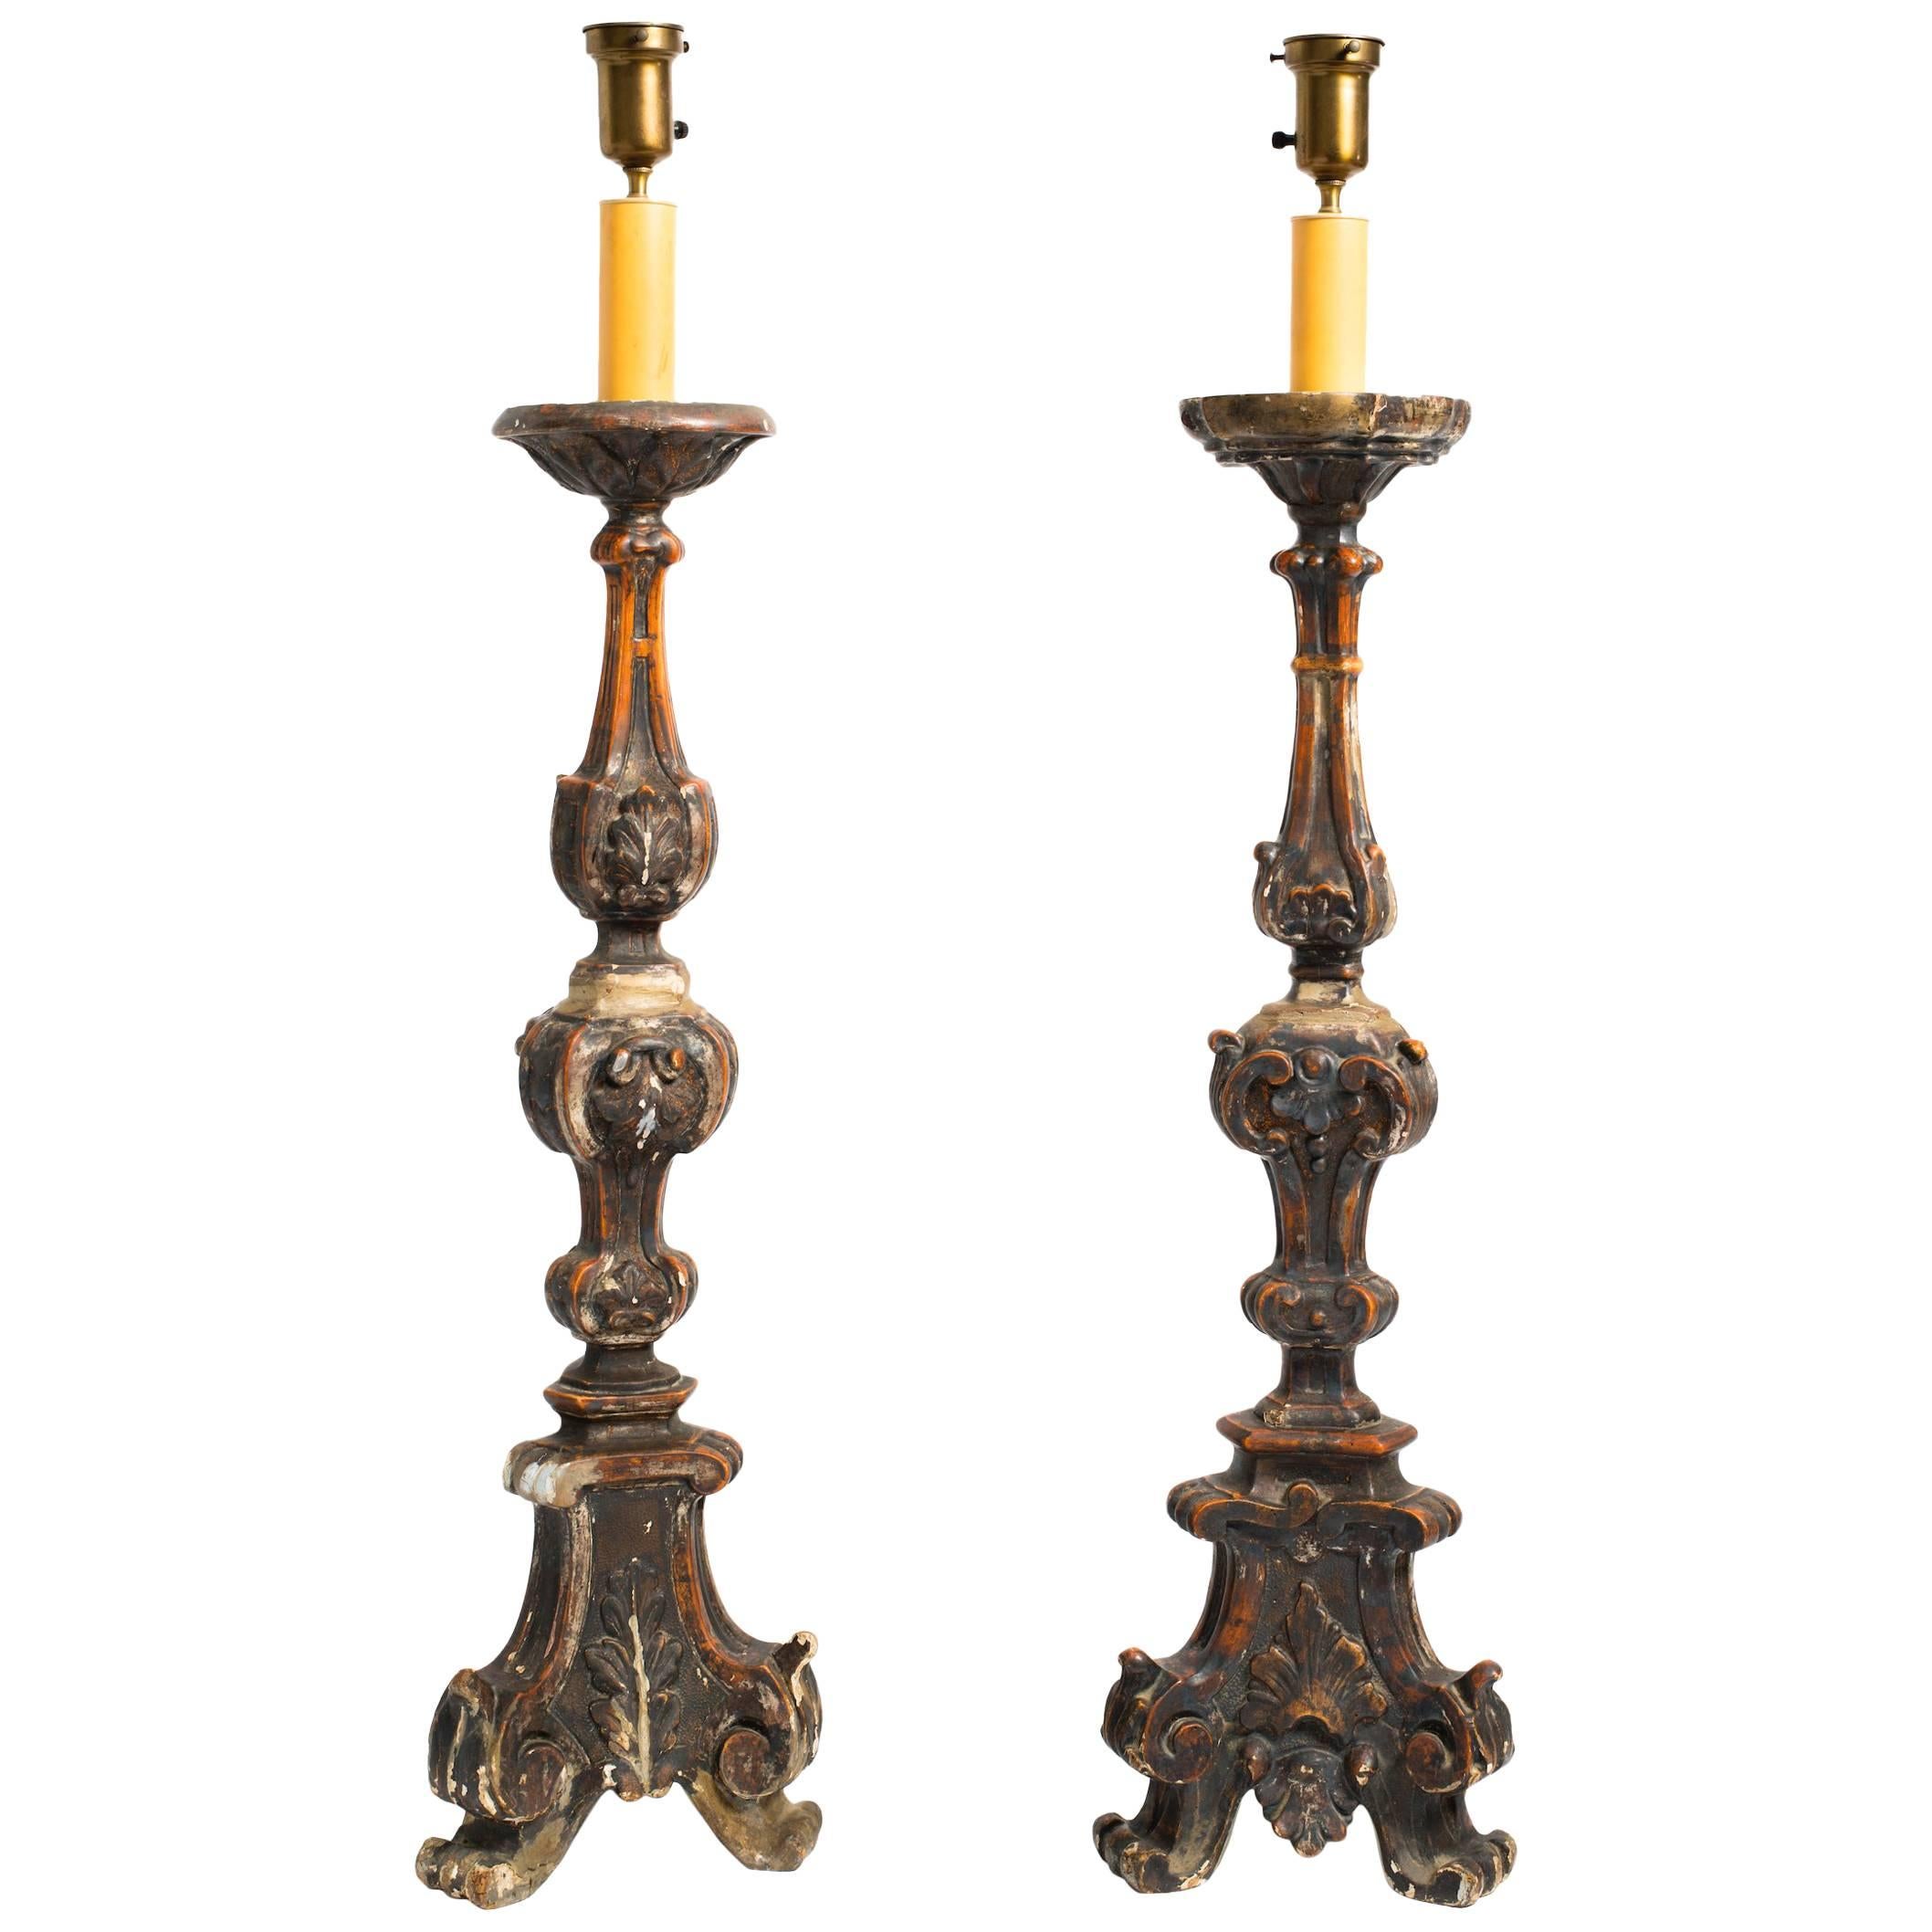 Two Italian Carved Wood Tall Candlestick Lamps